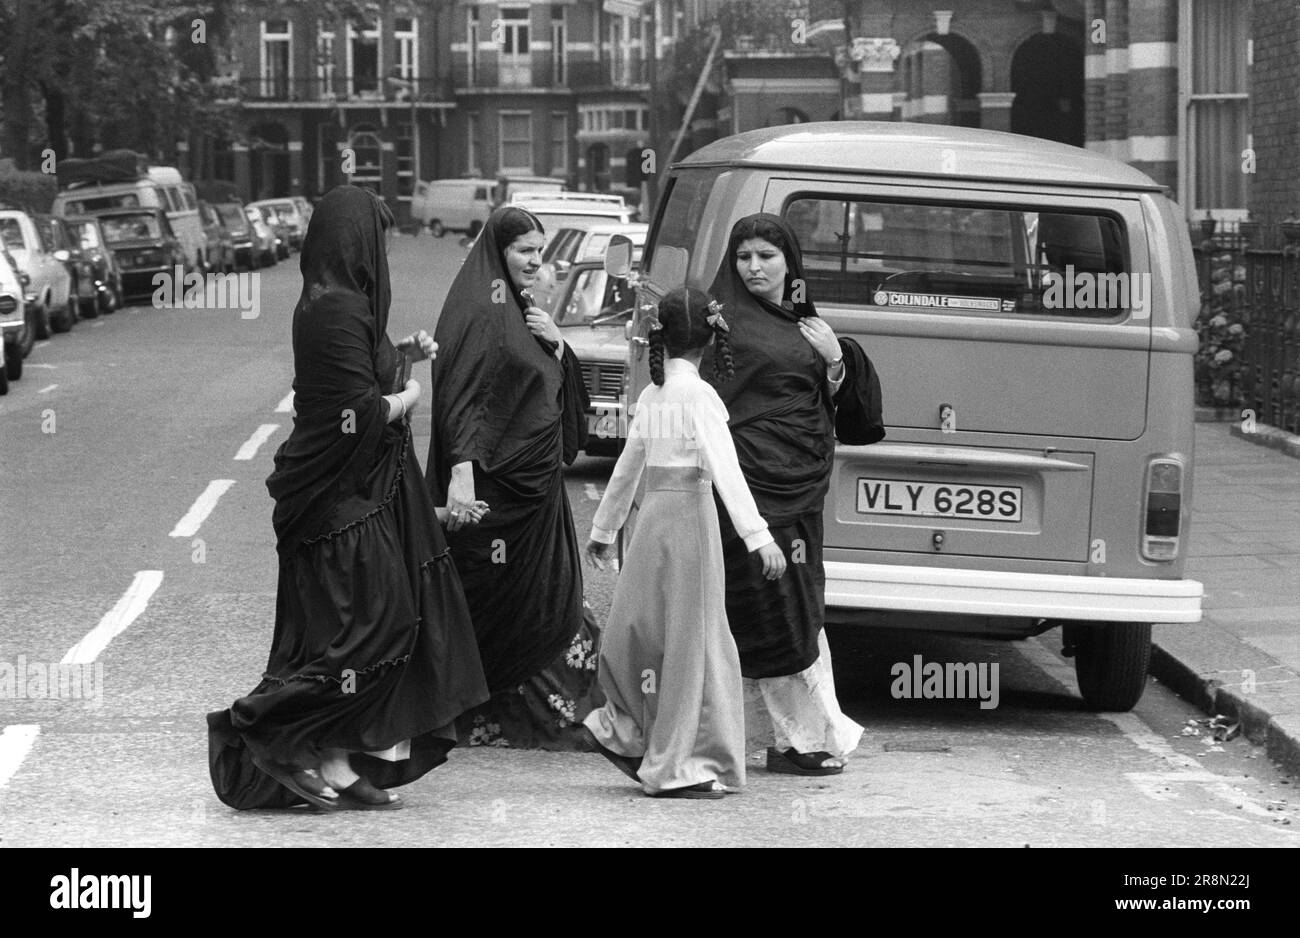 Arab Family in London 1970s. Middle Eastern people came to Britain for subsidised healthcare in Harley Street clinics. They mainly stayed in cheap hotels in Earls Court. Earls Court, London, England circa 1977 1970s UK HOMER SYKES Stock Photo